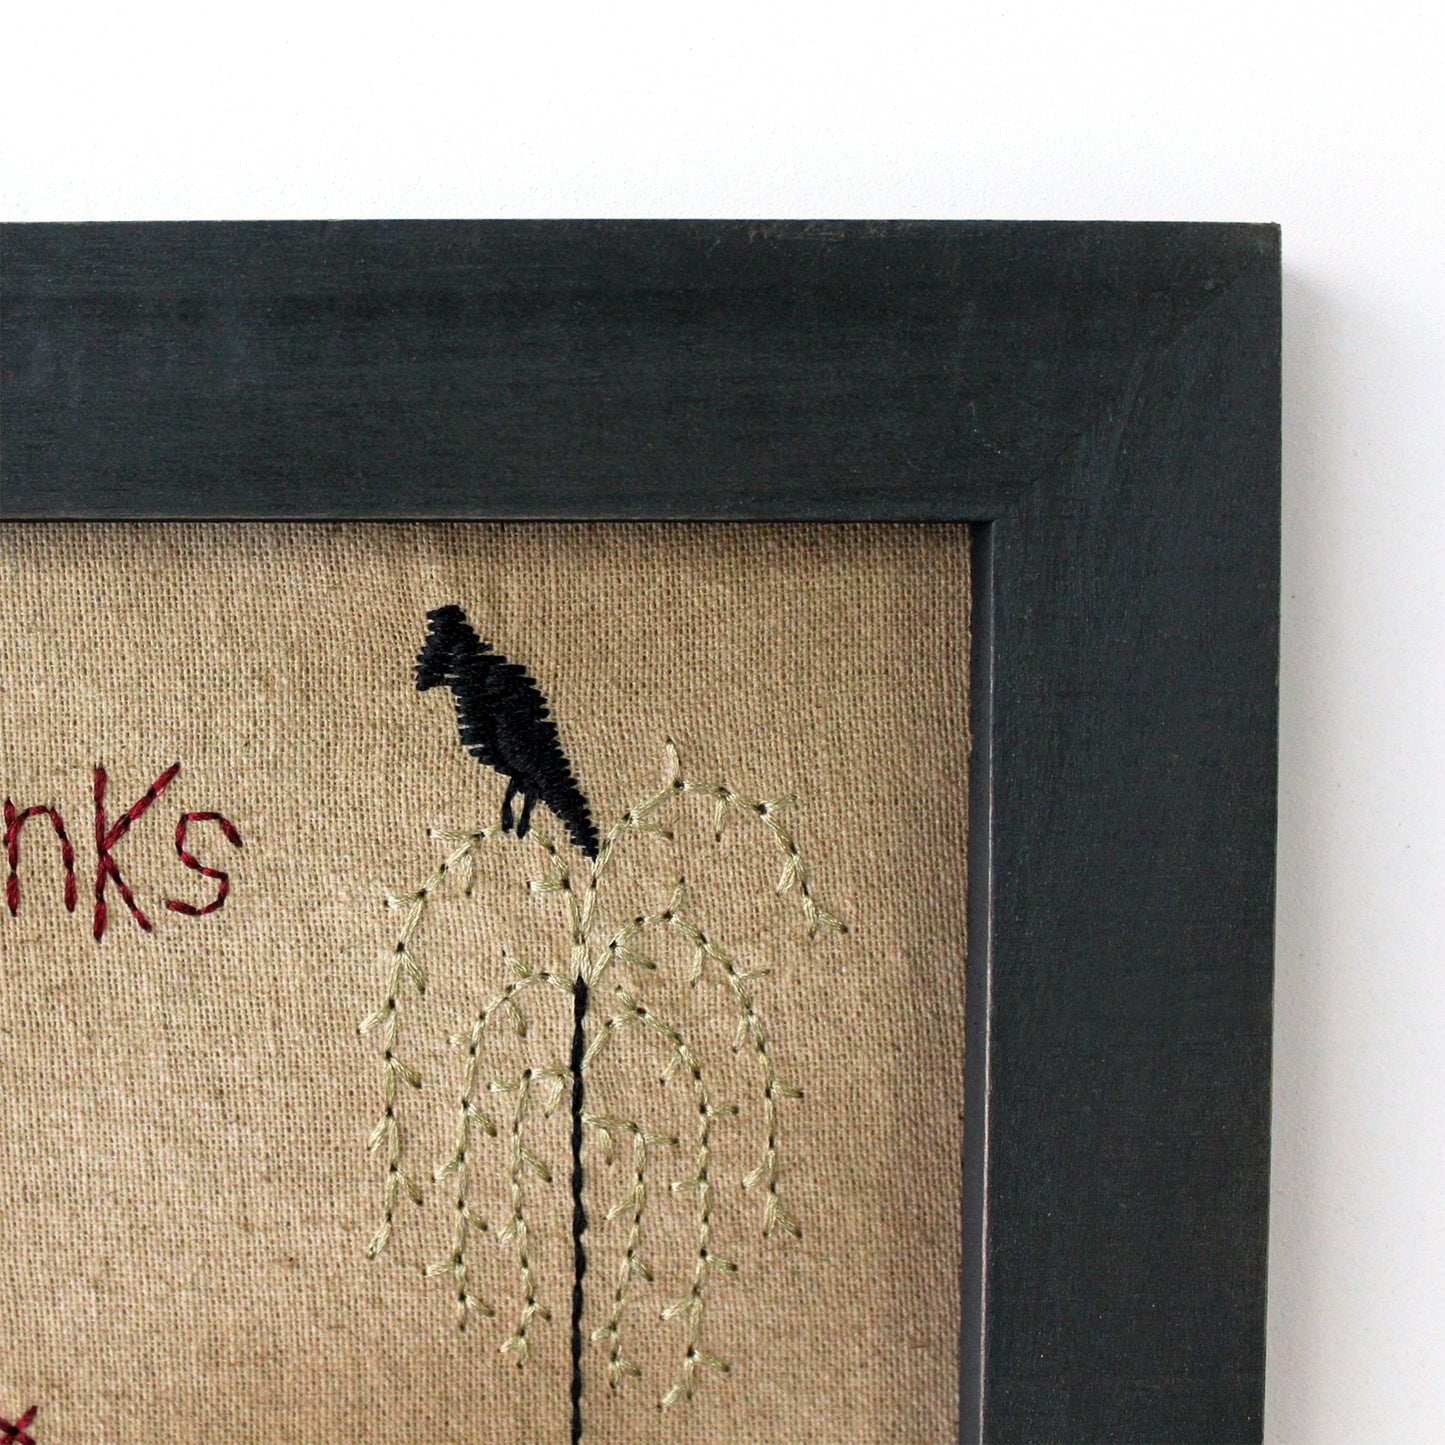 CVHOMEDECO. Primitives Antique Give Thanks for Simple Blessings Stitchery Frame Wall Mounted Hanging Decor Art, 9 x 7 Inch